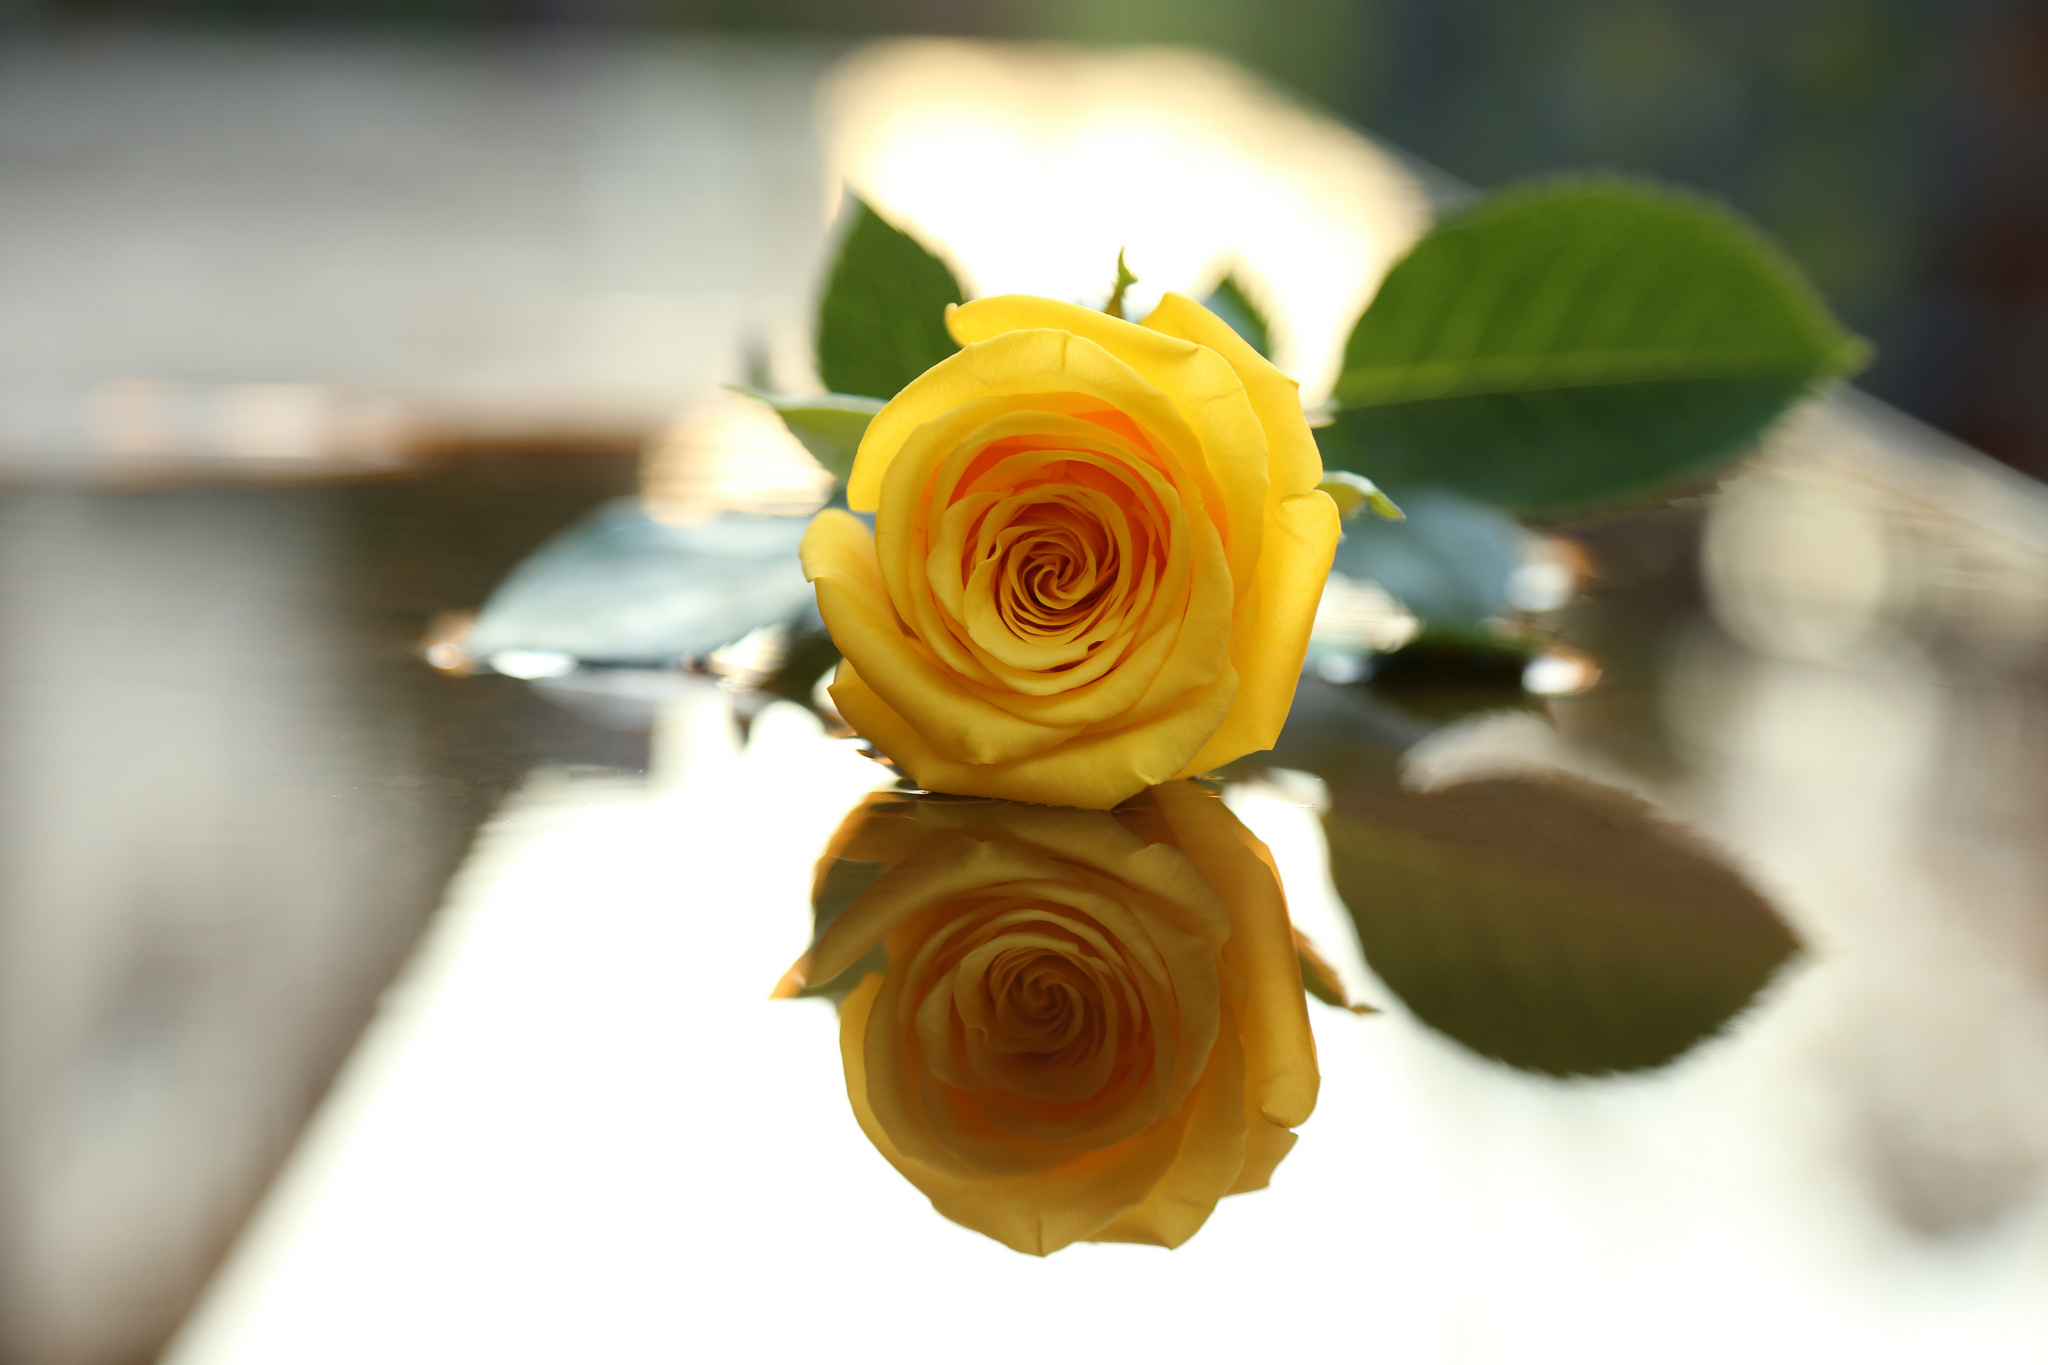 Flower Leaf Reflection Rose Yellow Flower Yellow Rose 2048x1365